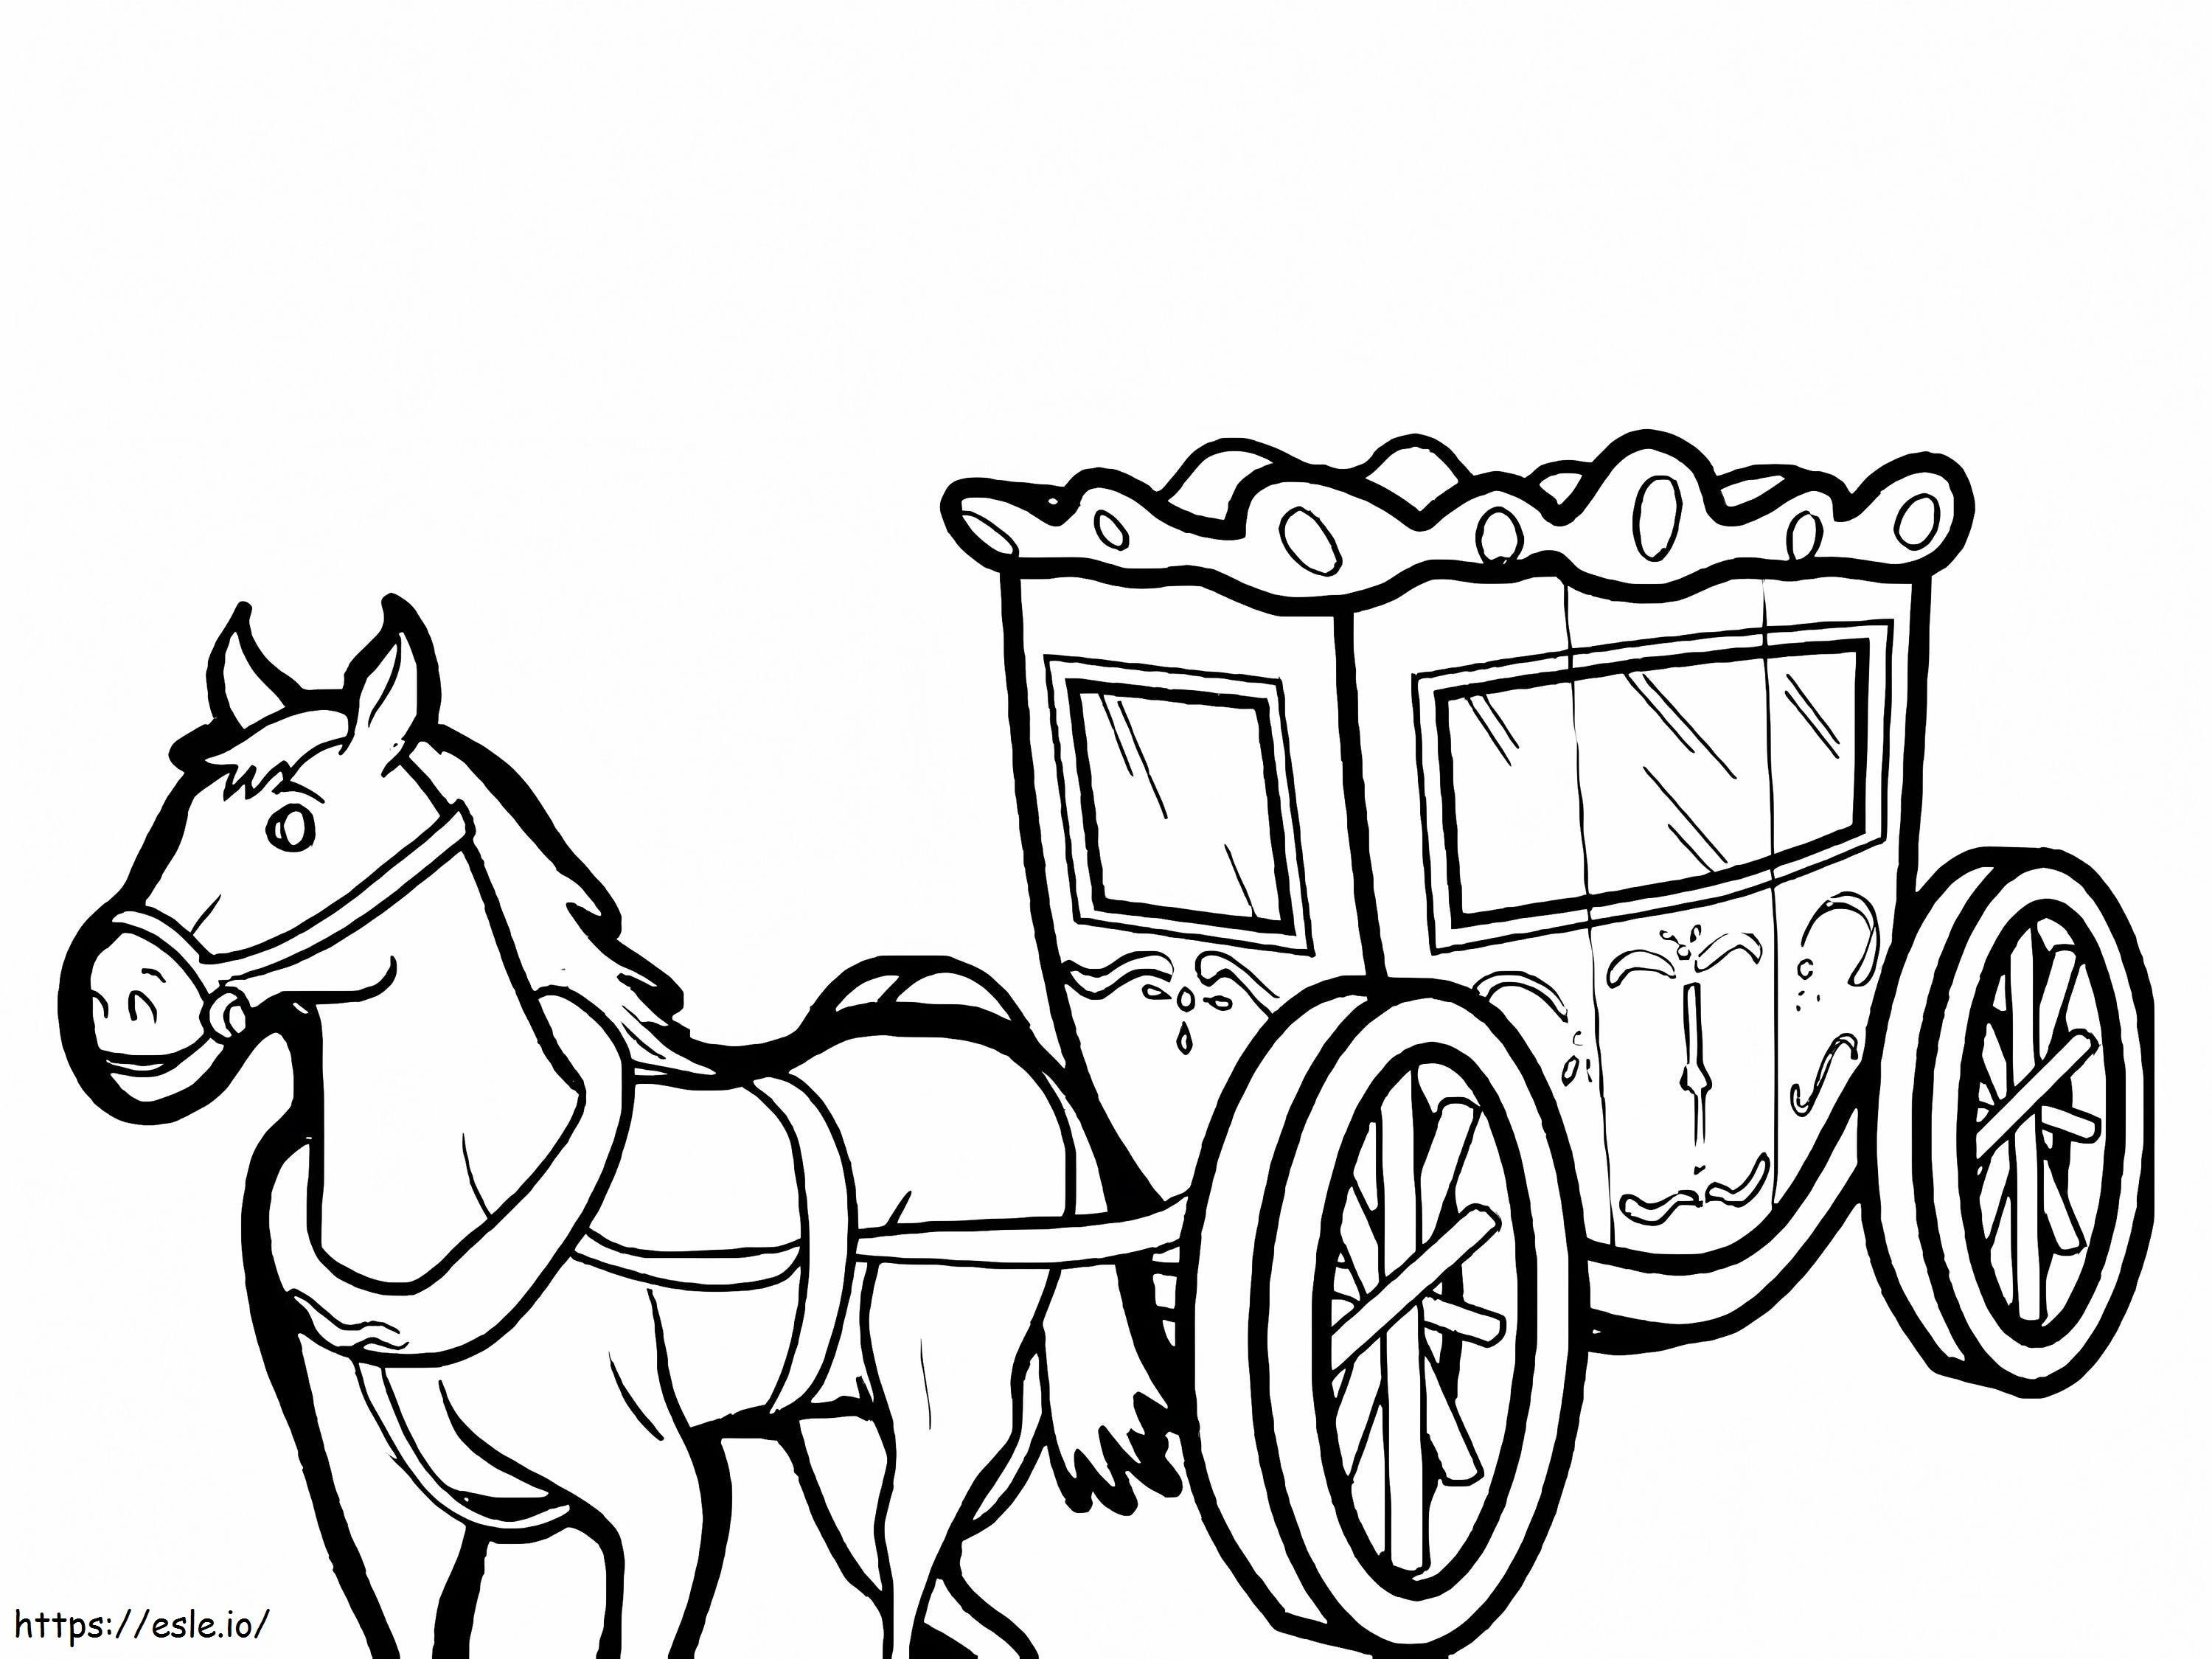 Horse Carriage coloring page